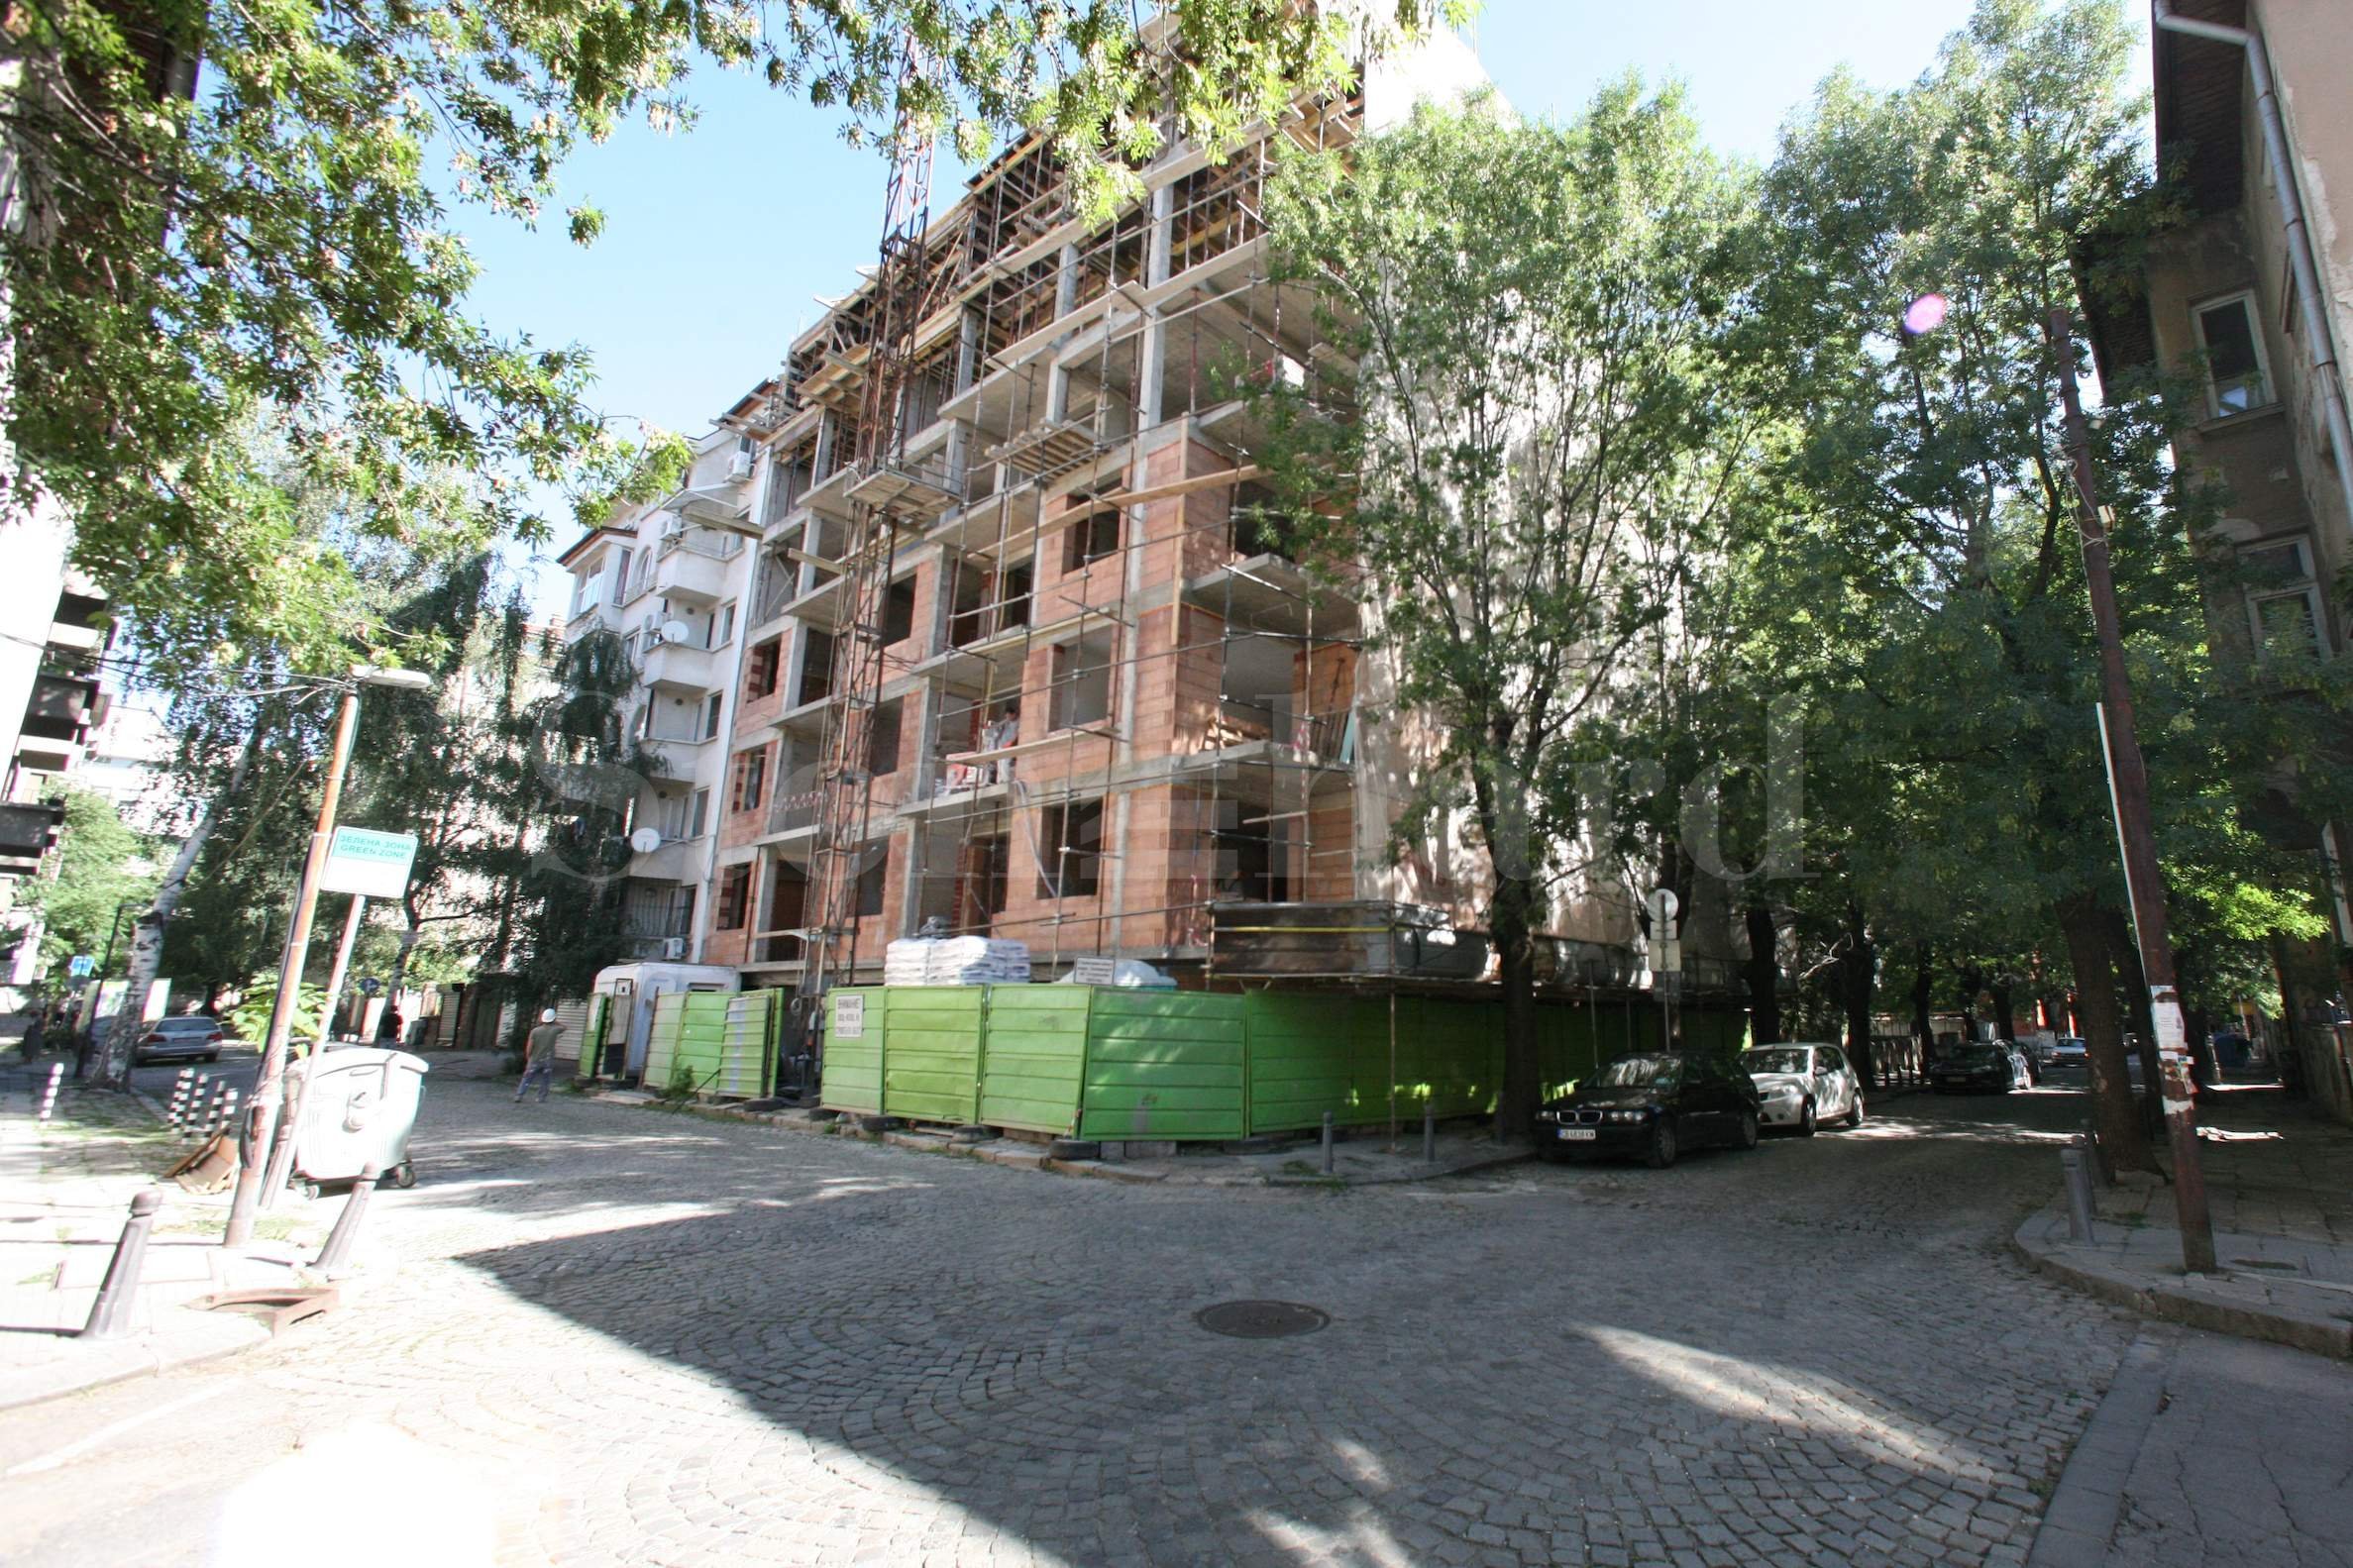 New-build apartments on a quiet street in Sofia's city center1 - Stonehard